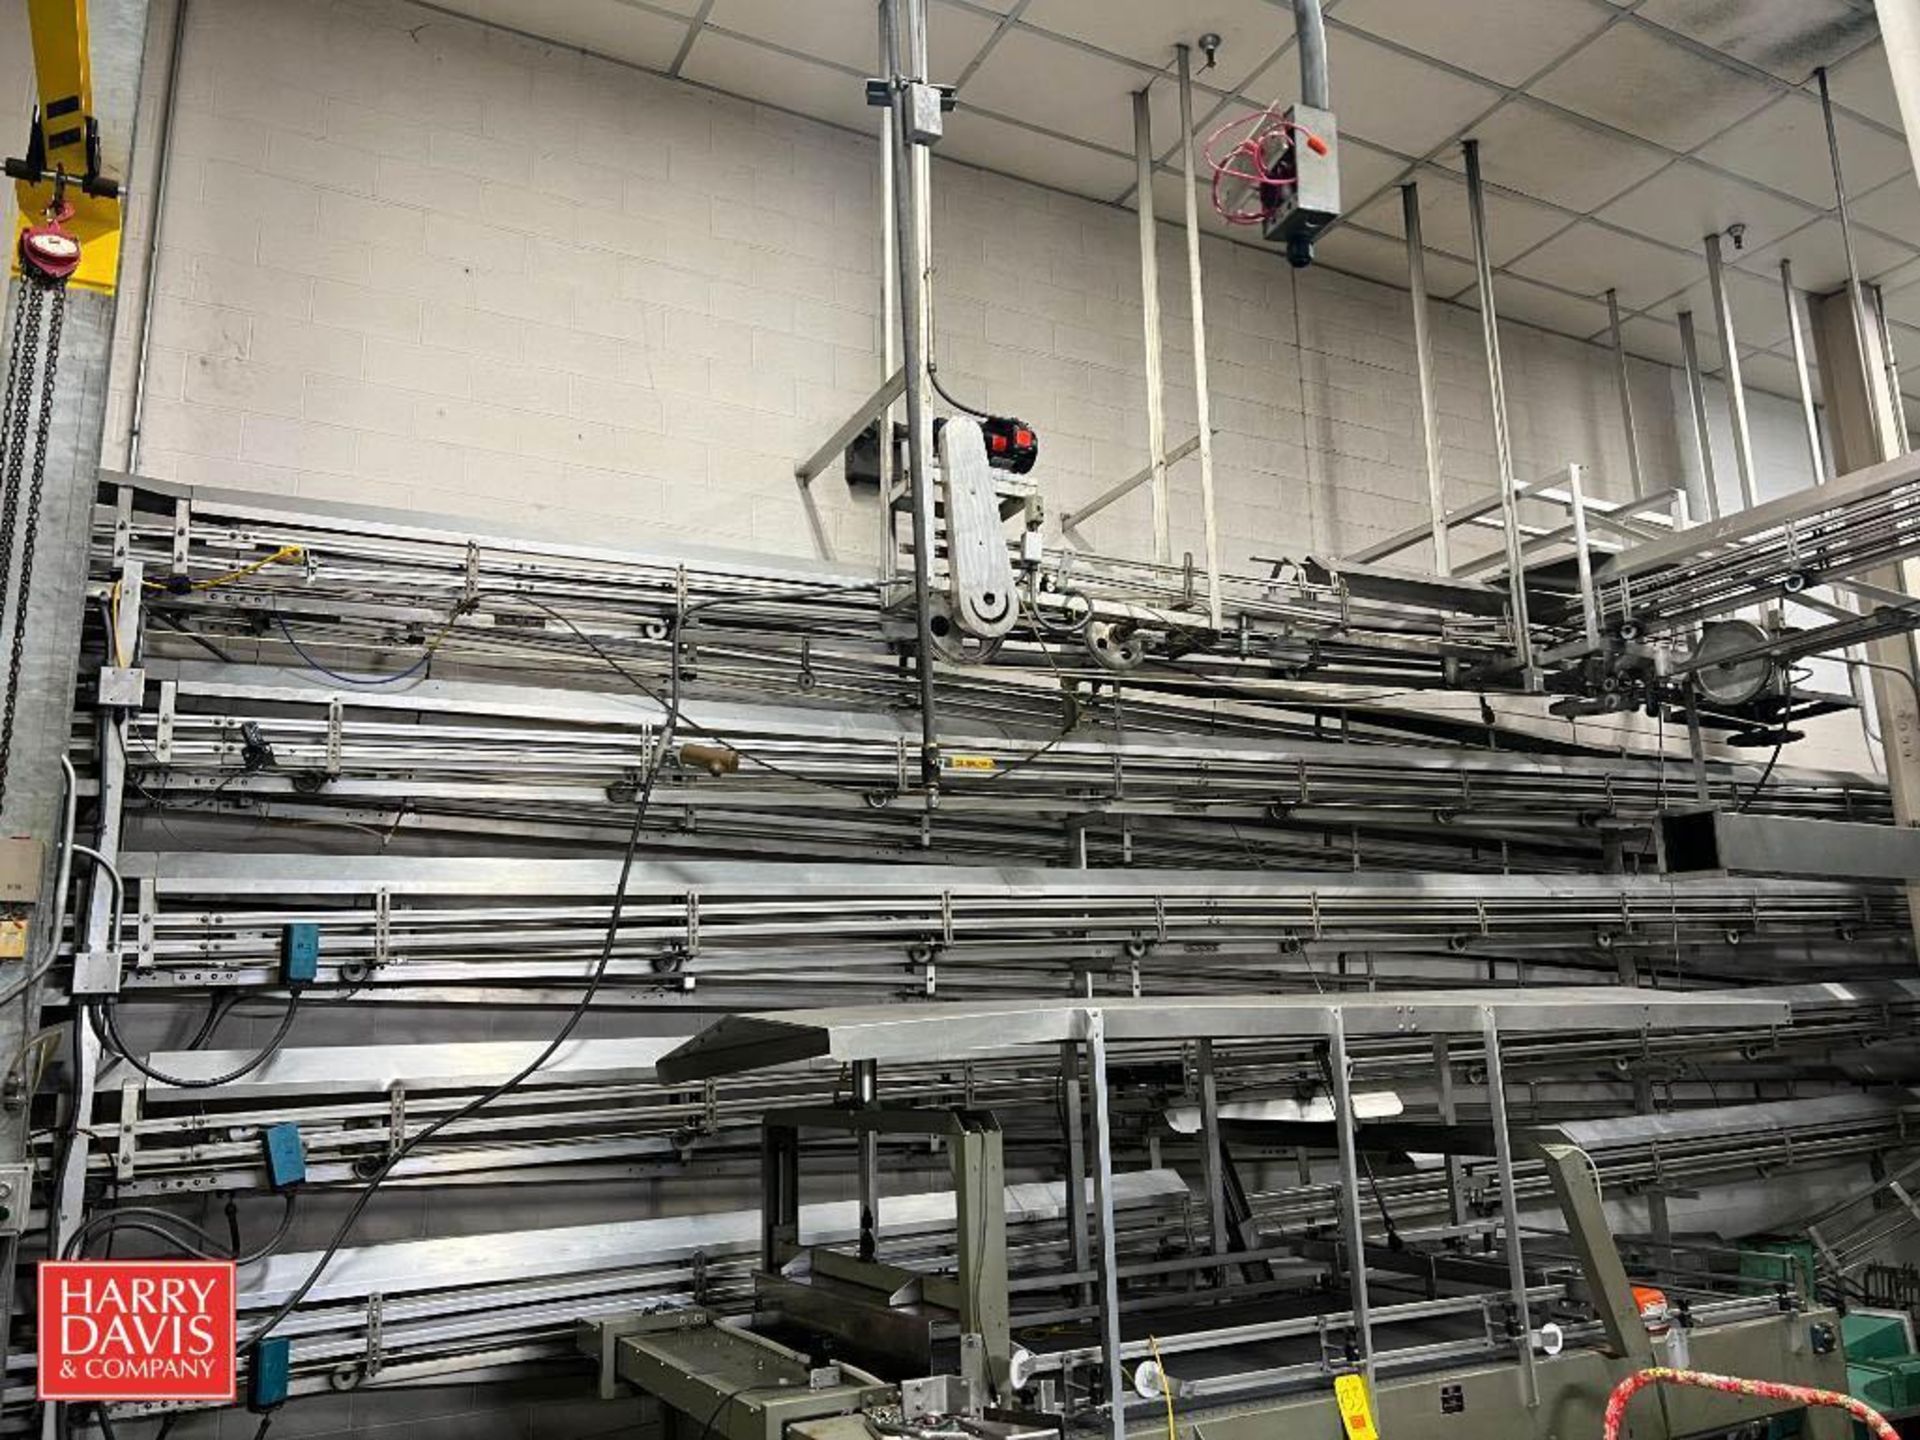 Alpine Conveyor System with S/S Chutes and Drives, Dimensions = 1,250'+ - Rigging Fee: Contact HDC